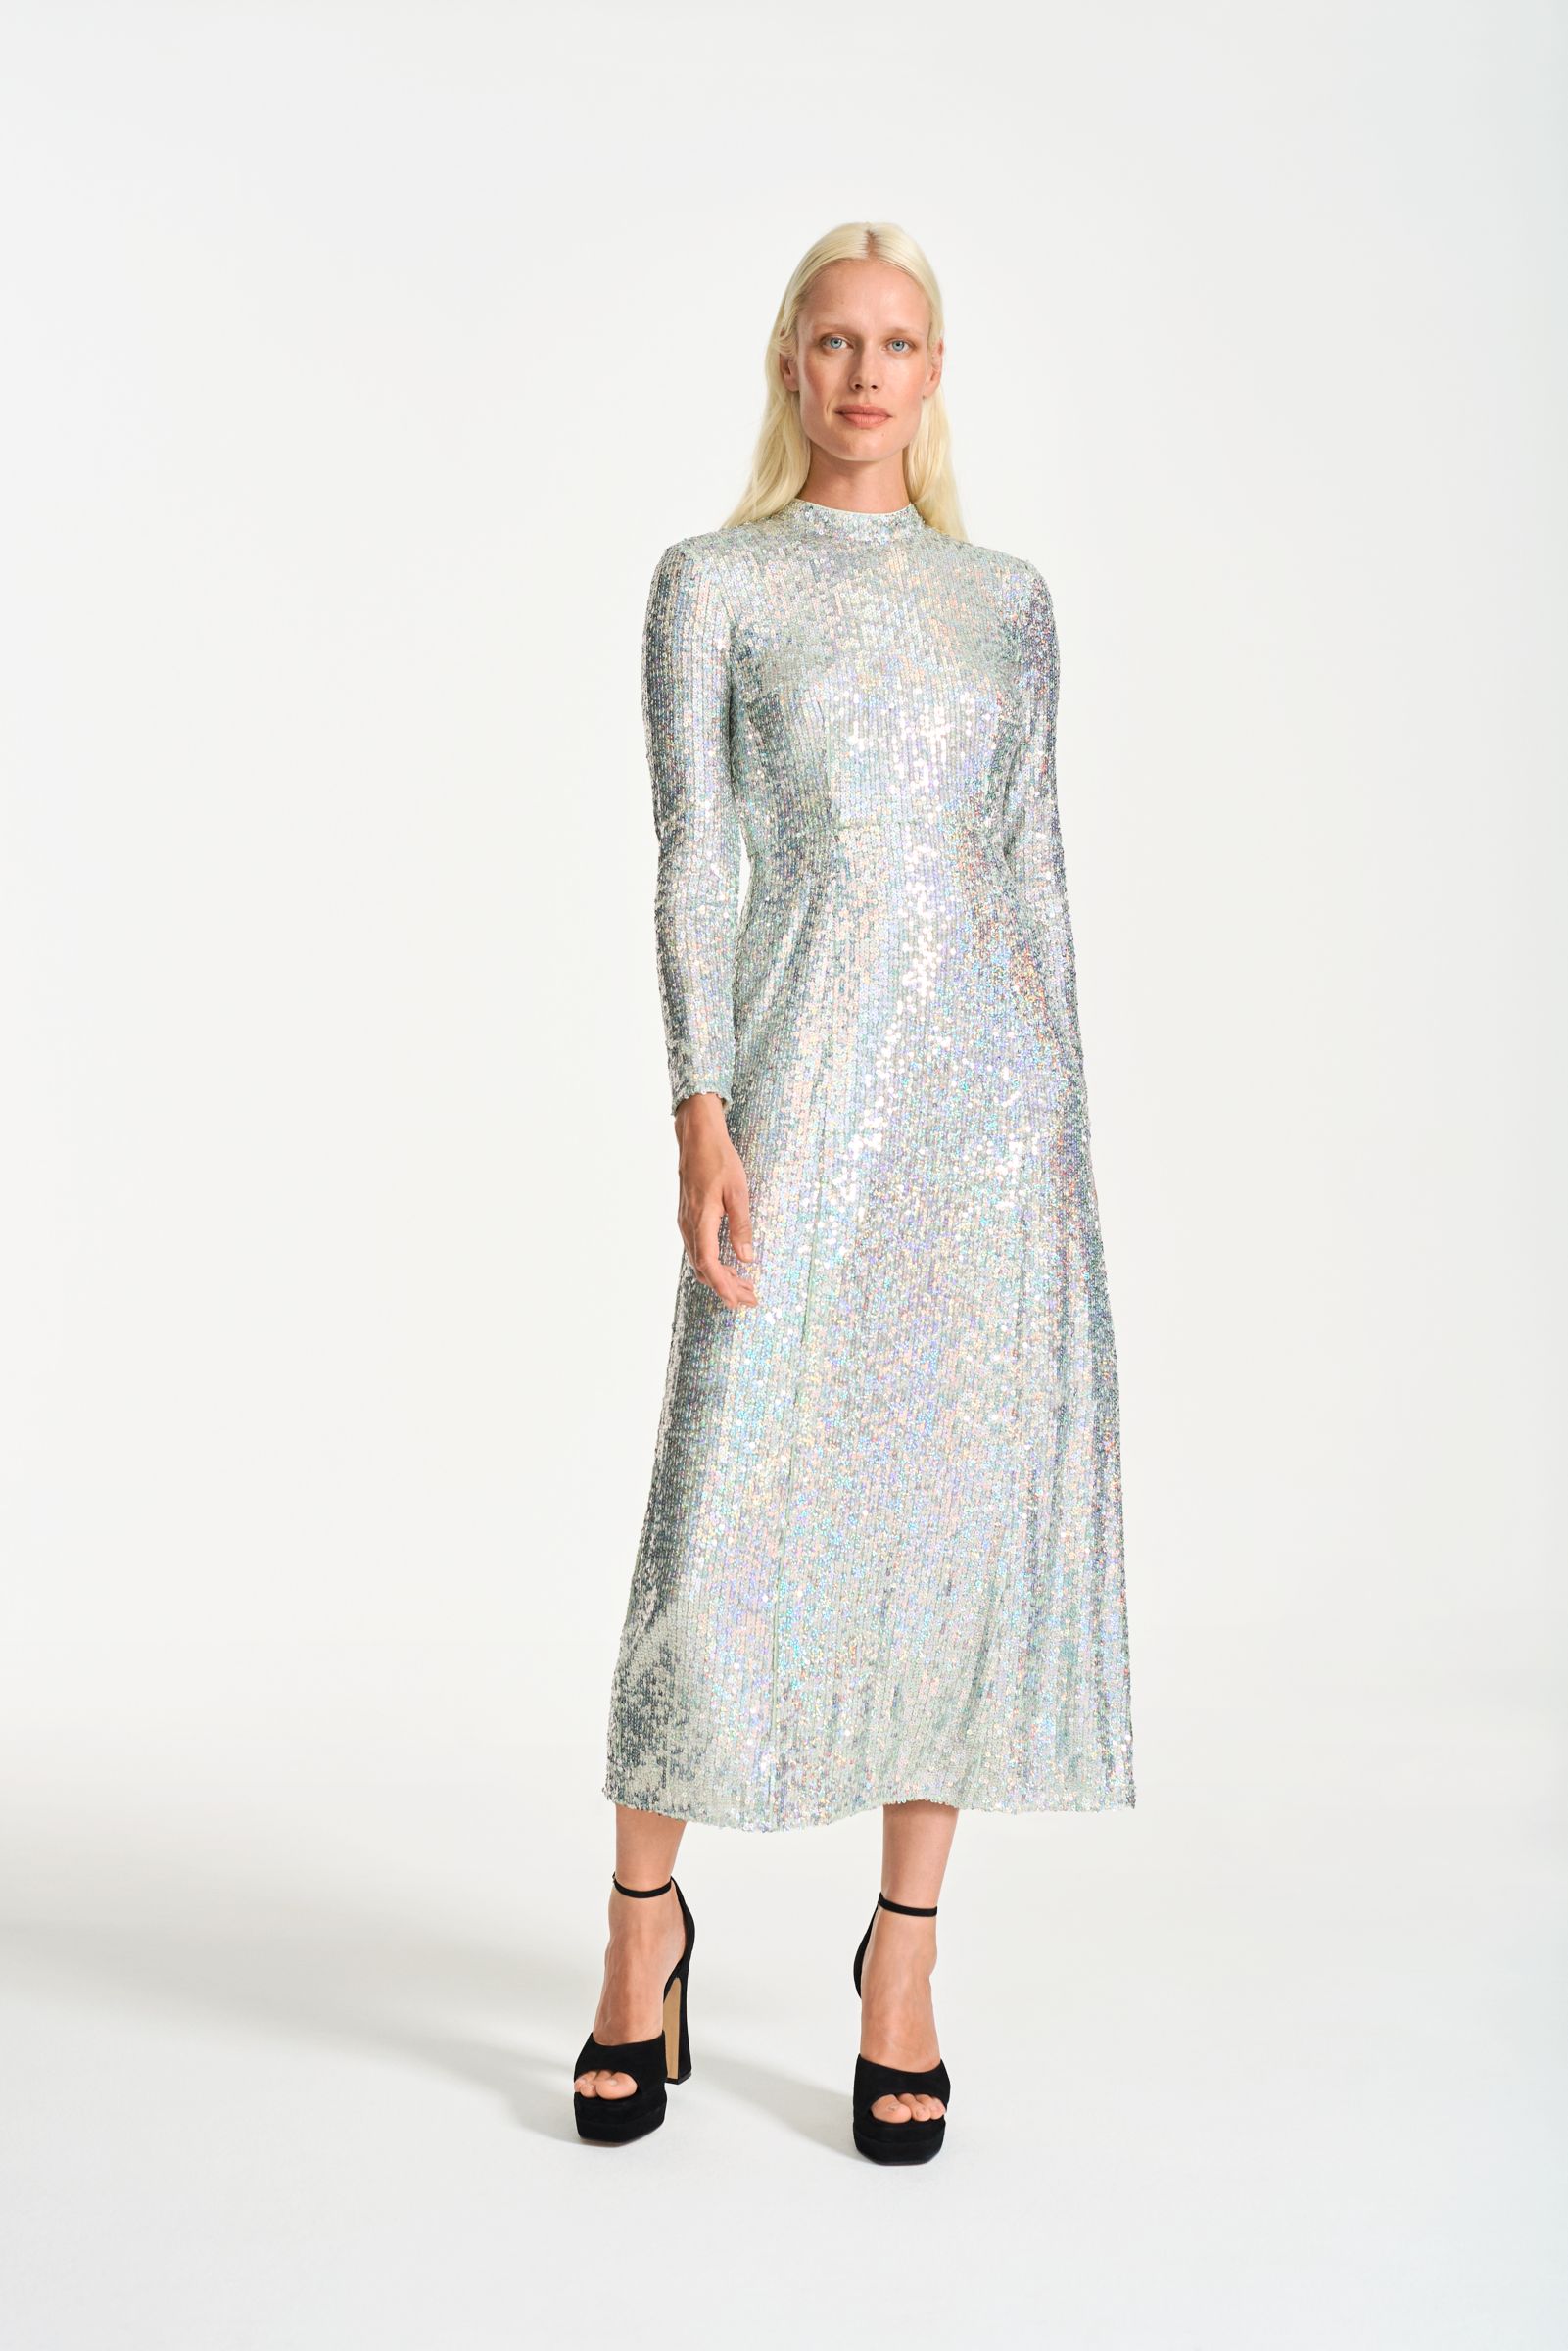 Silver Sequin Dresses for Women - Up to 70% off